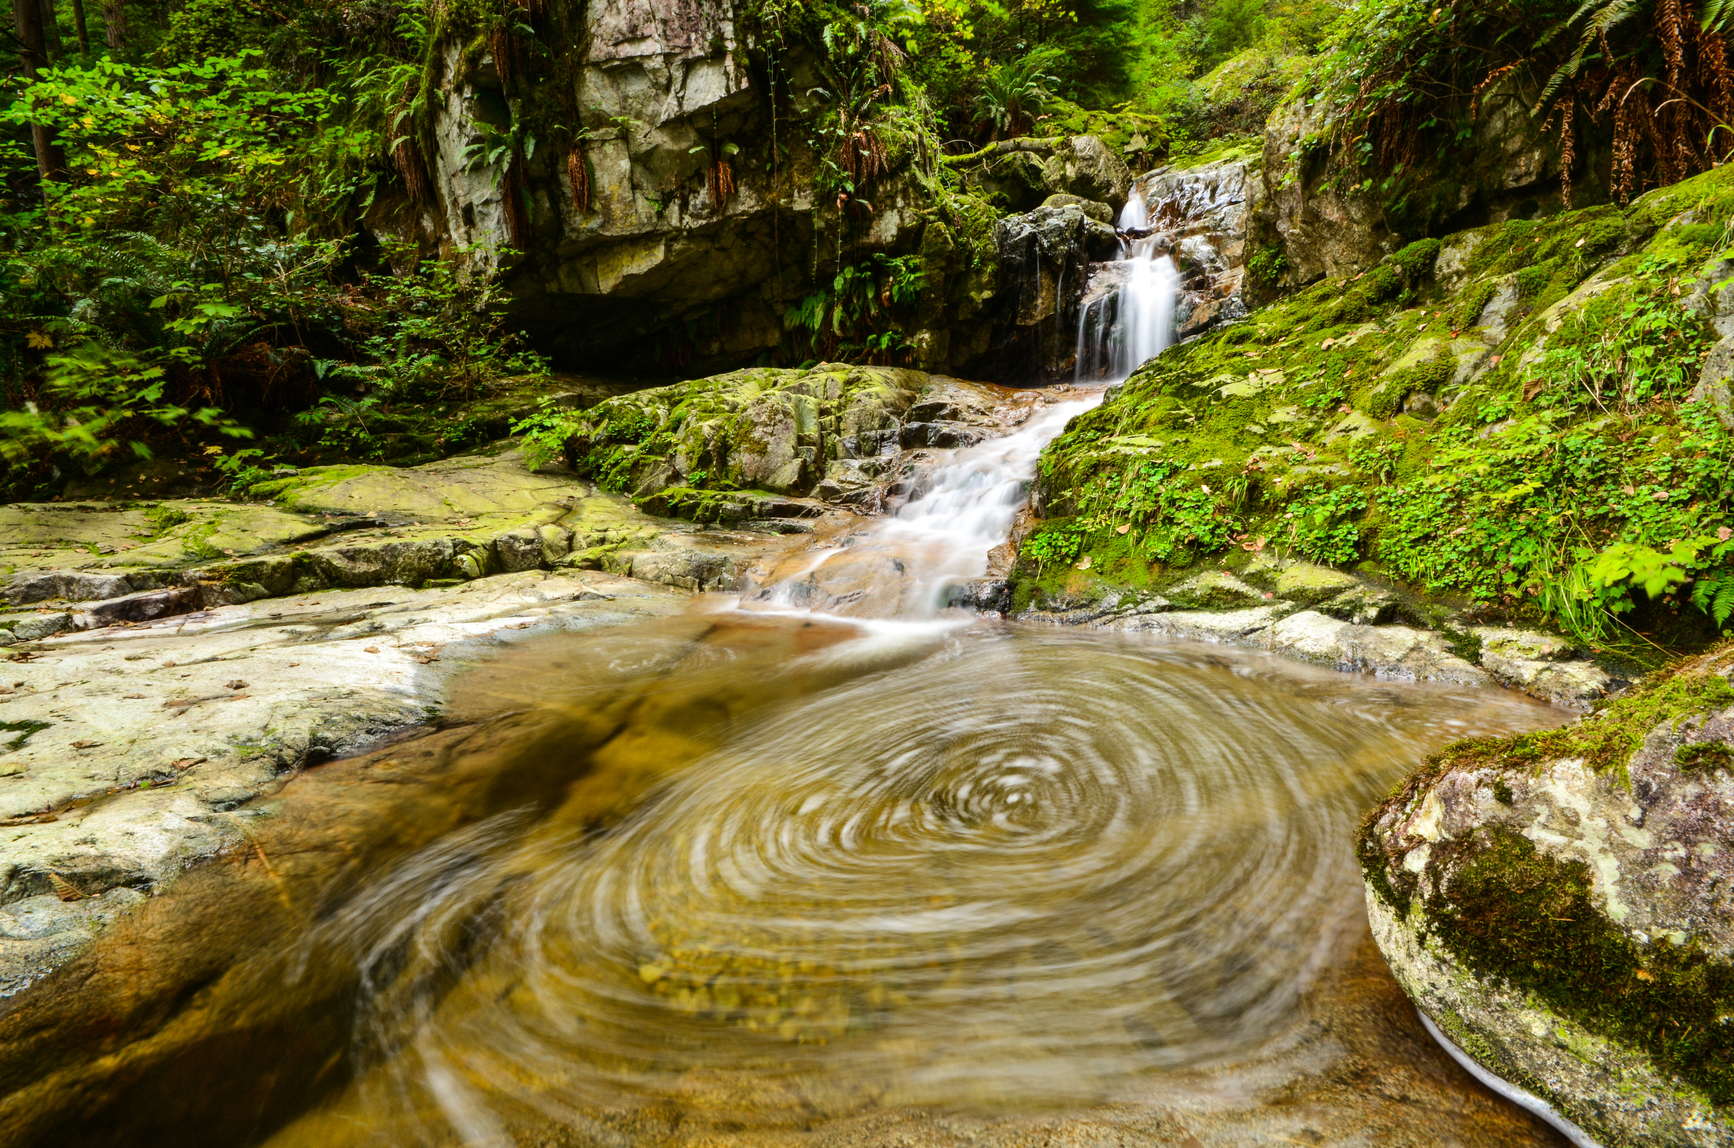 A waterfall in Pinecone Burke Park flowing into a rocky pool creating an eddy.